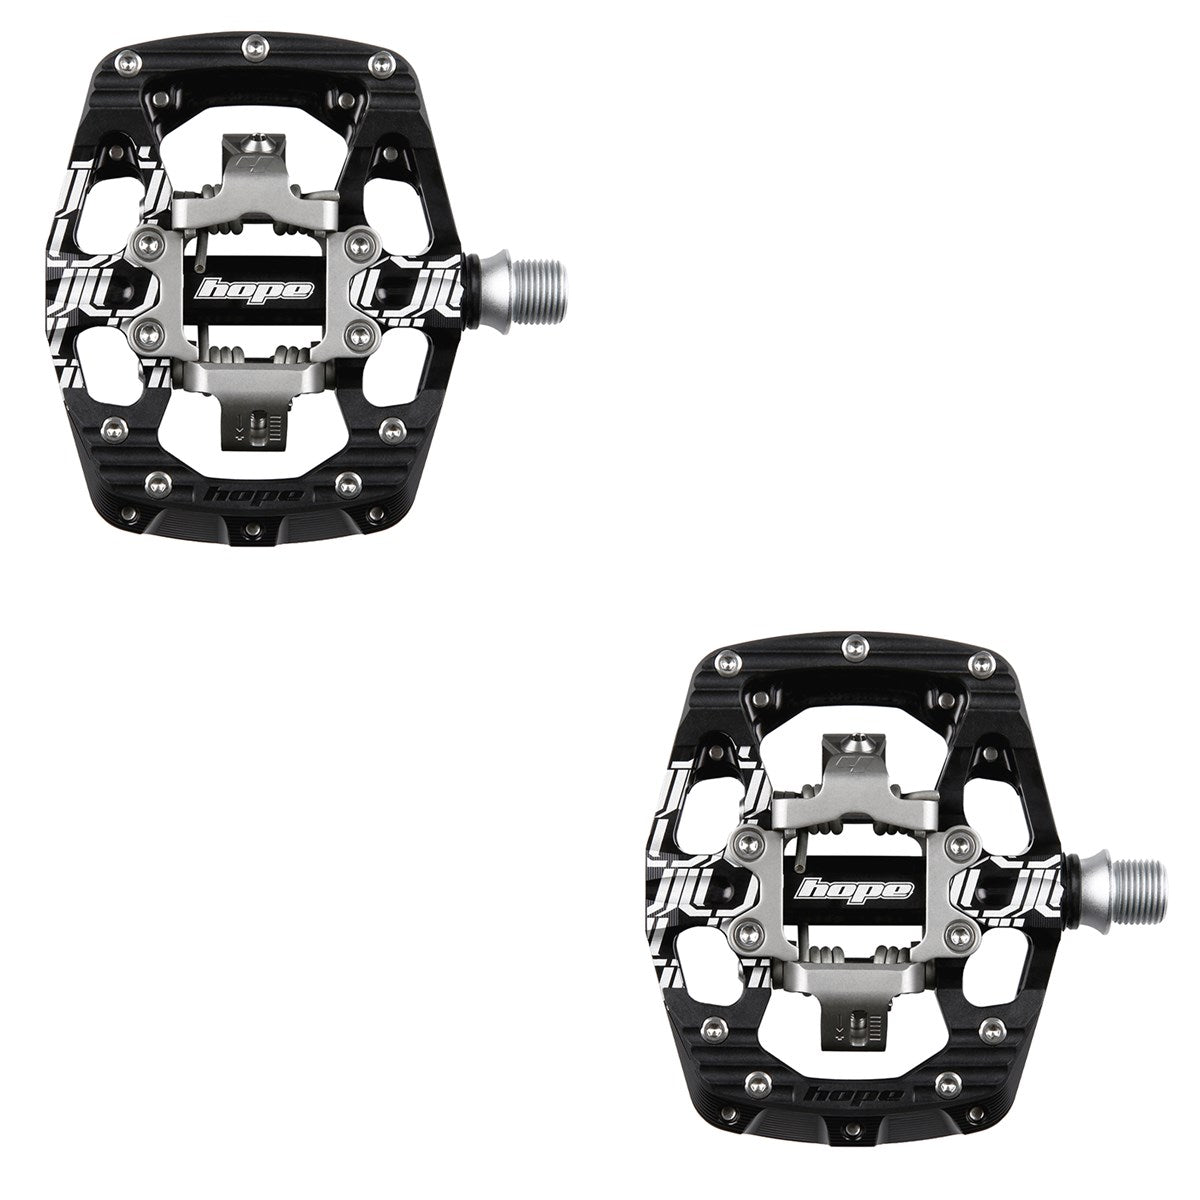 Hope union gravity clipless pedals black